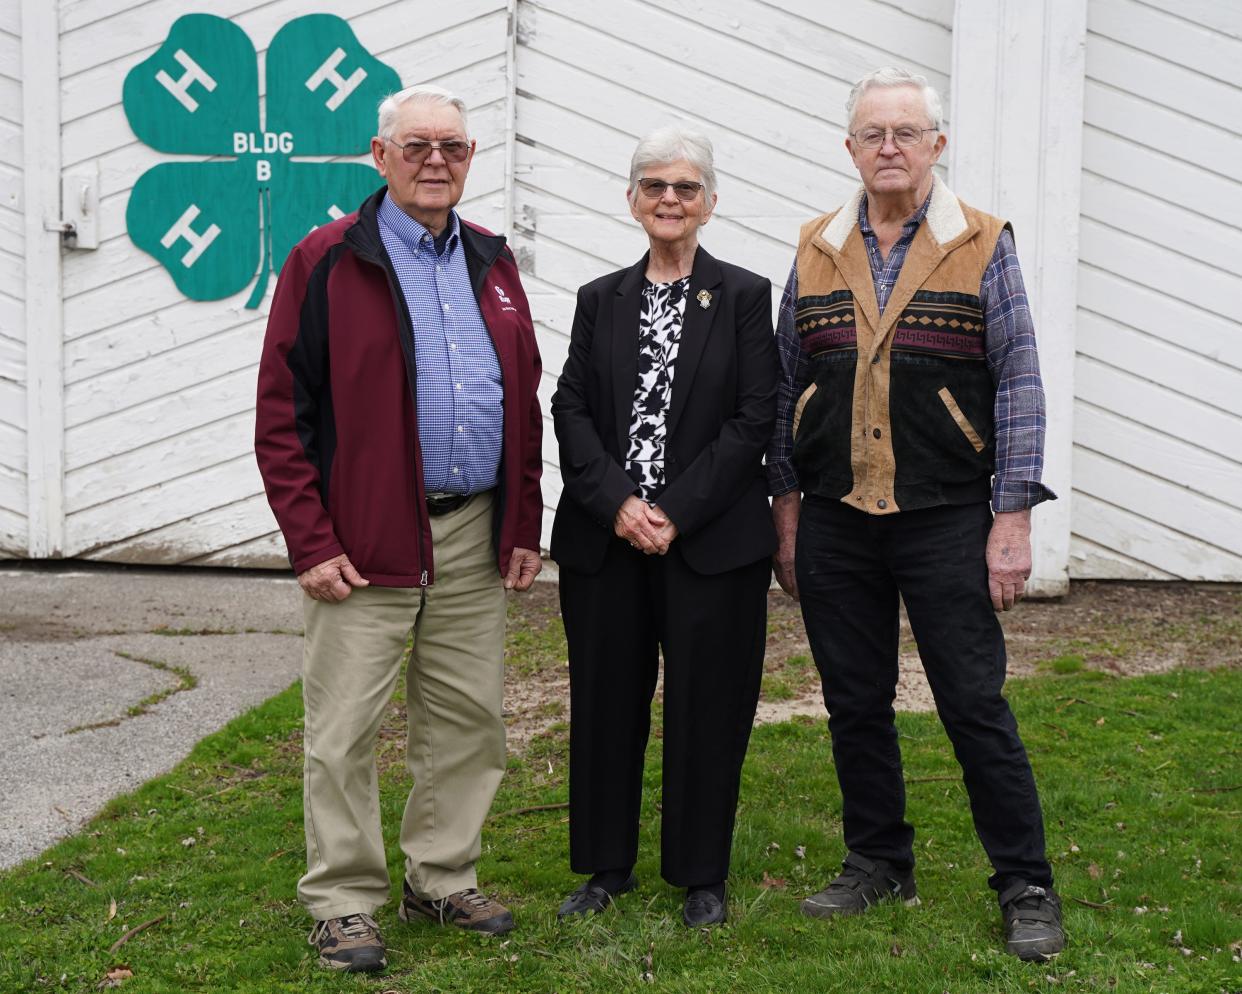 From left, Larry and Joan Gould and Dr. Howard Pennington are pictured April 22 at the Lenawee County Fair & Event Grounds. Each of them has dedicated well over 50 years to 4-H as volunteers and participants.